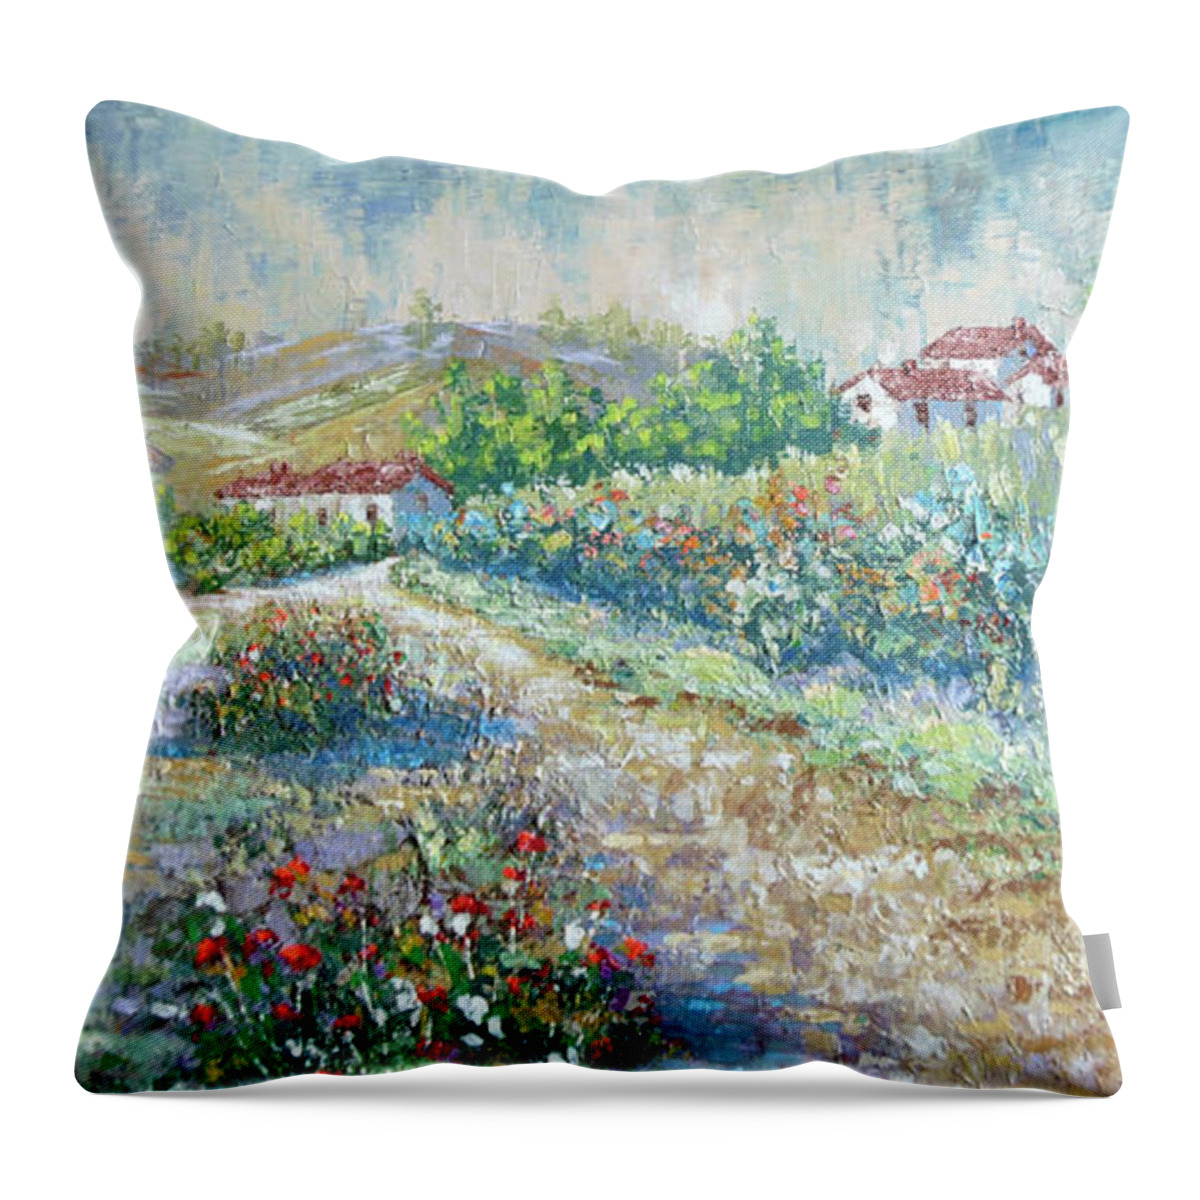 Provence Throw Pillow featuring the painting Saignon by Frederic Payet